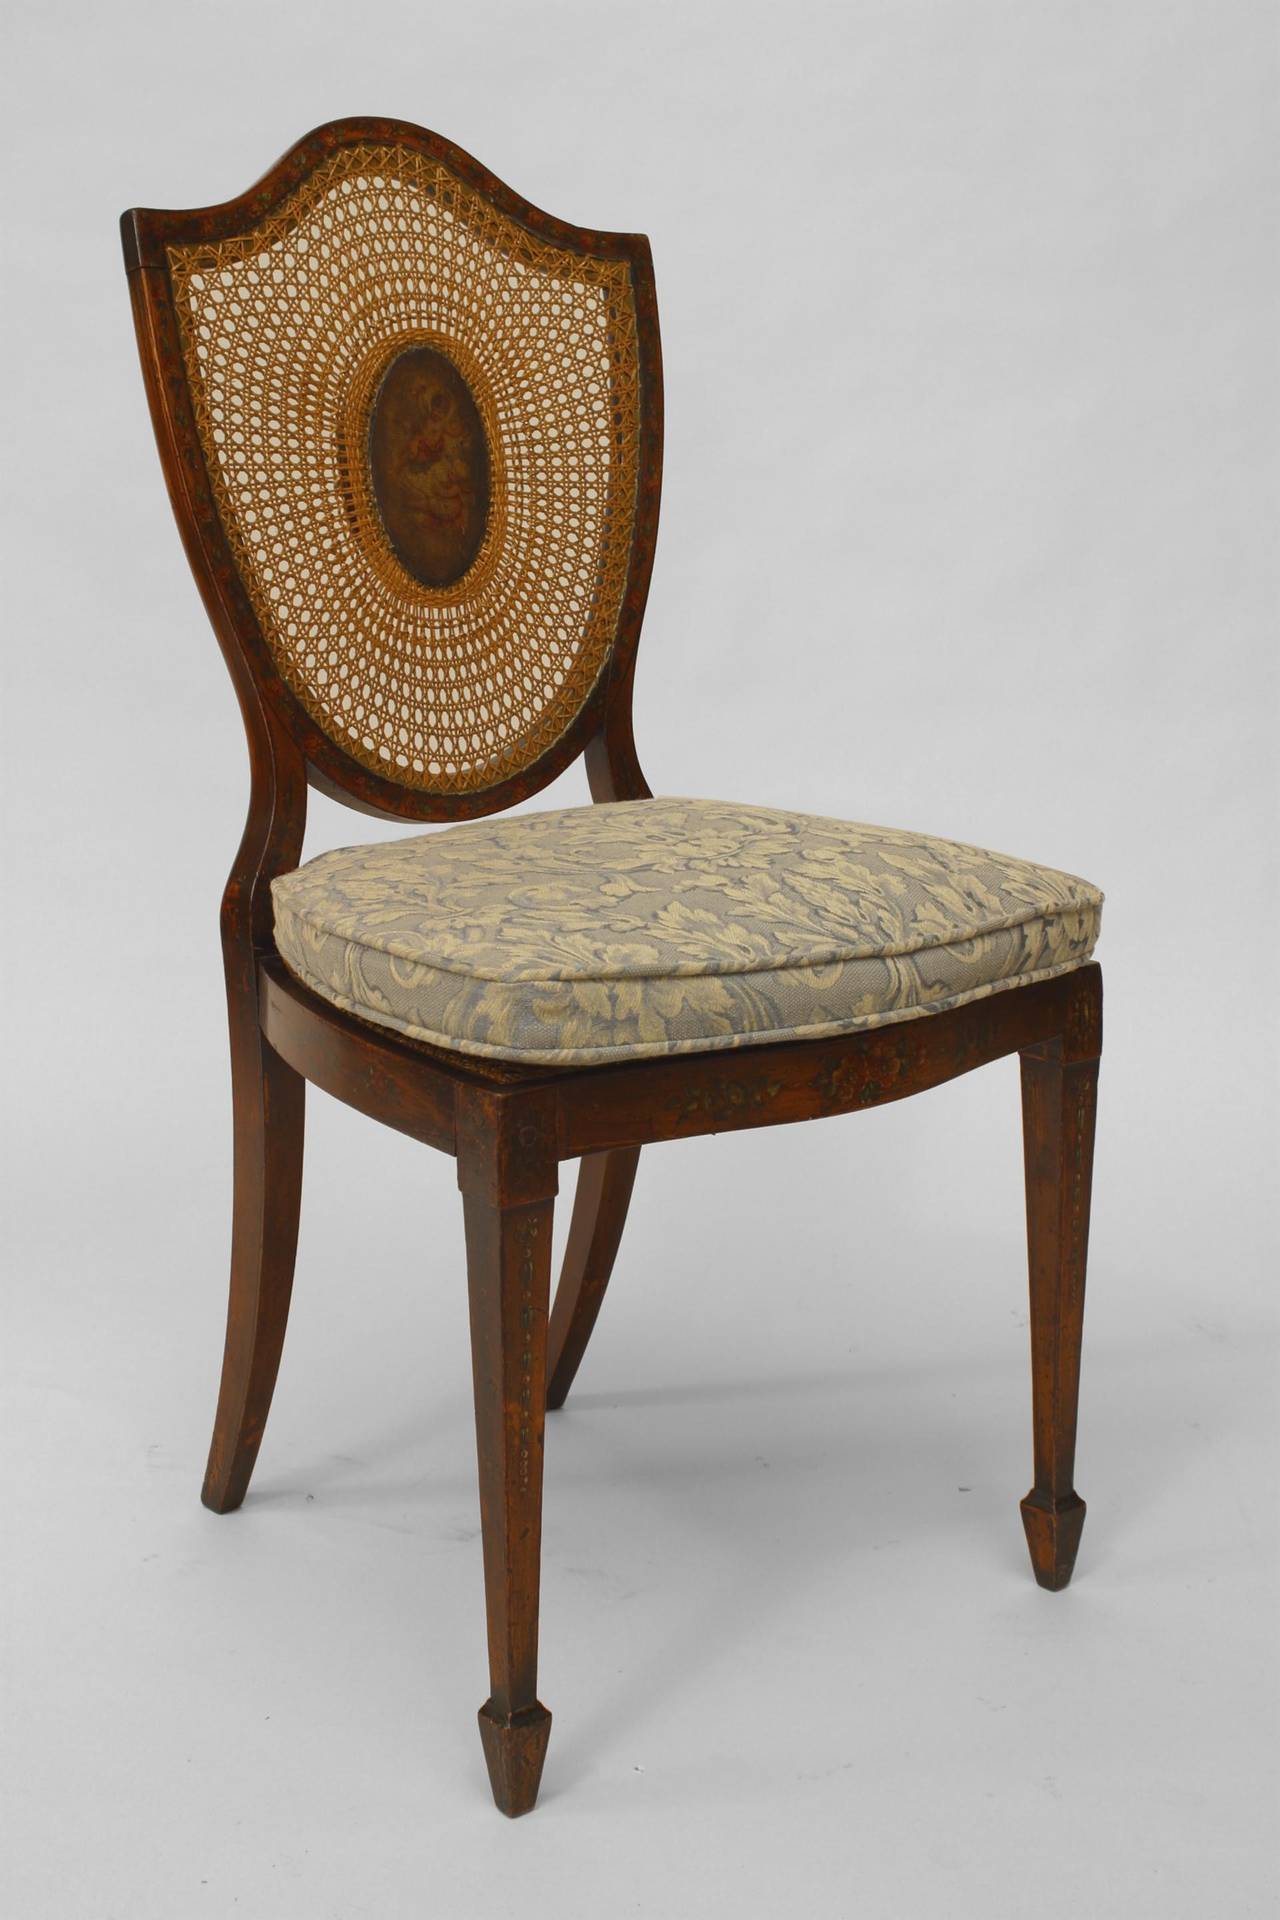 Pair of English Sheraton style (19th Cent) satinwood shield back side chairs with painted and cane back panels.
